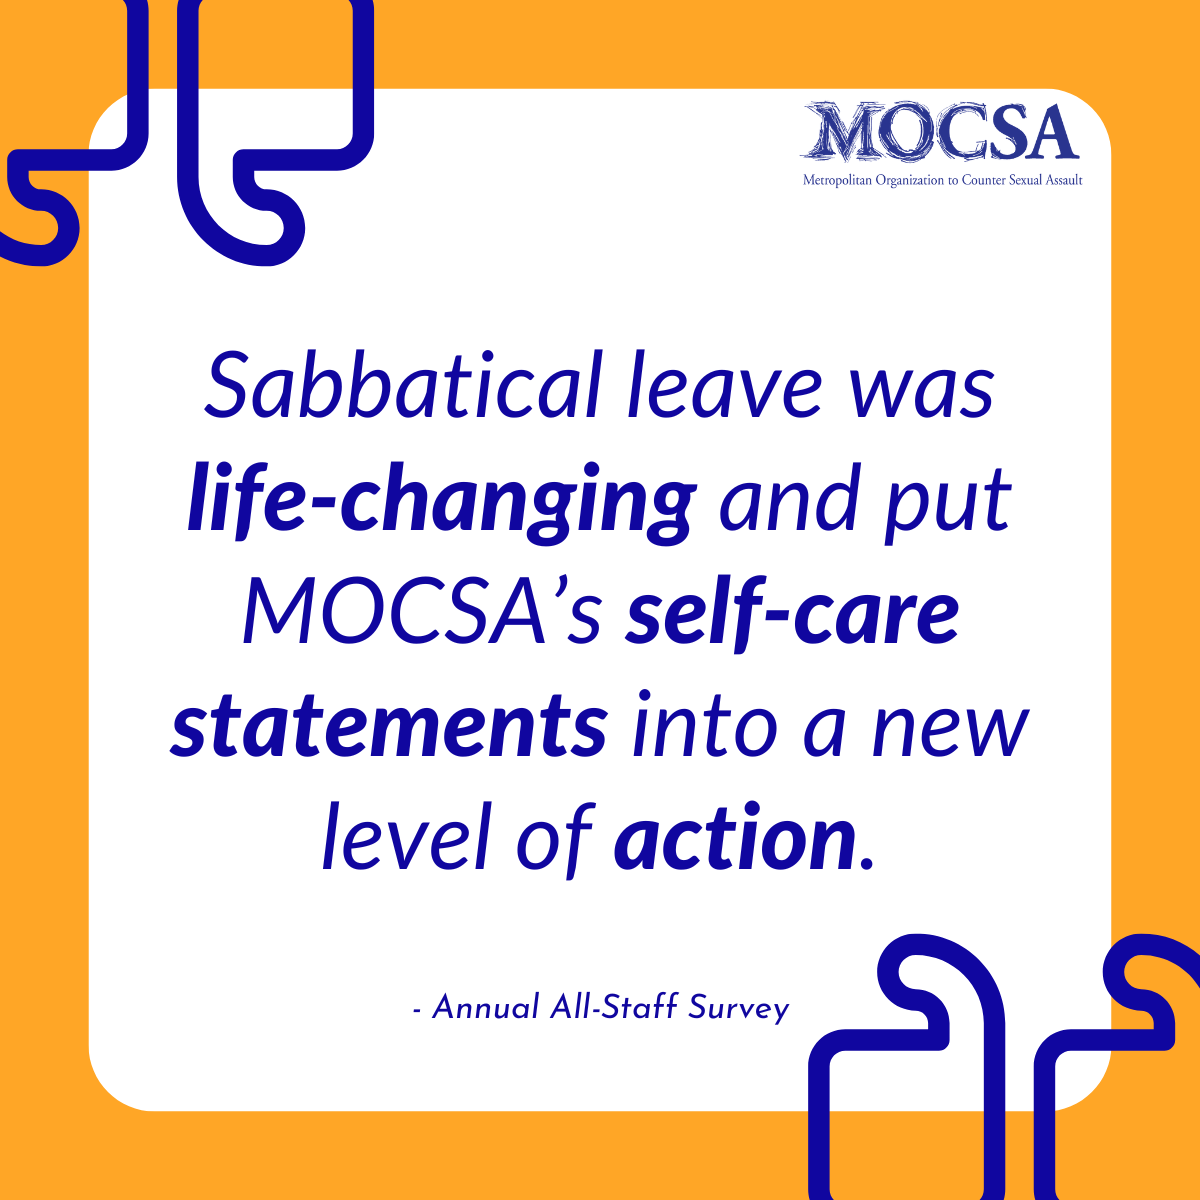 Blue text on white background that reads: Sabbatical leave was life-changing and put MOCSA’s self-care statements into a new level of action.